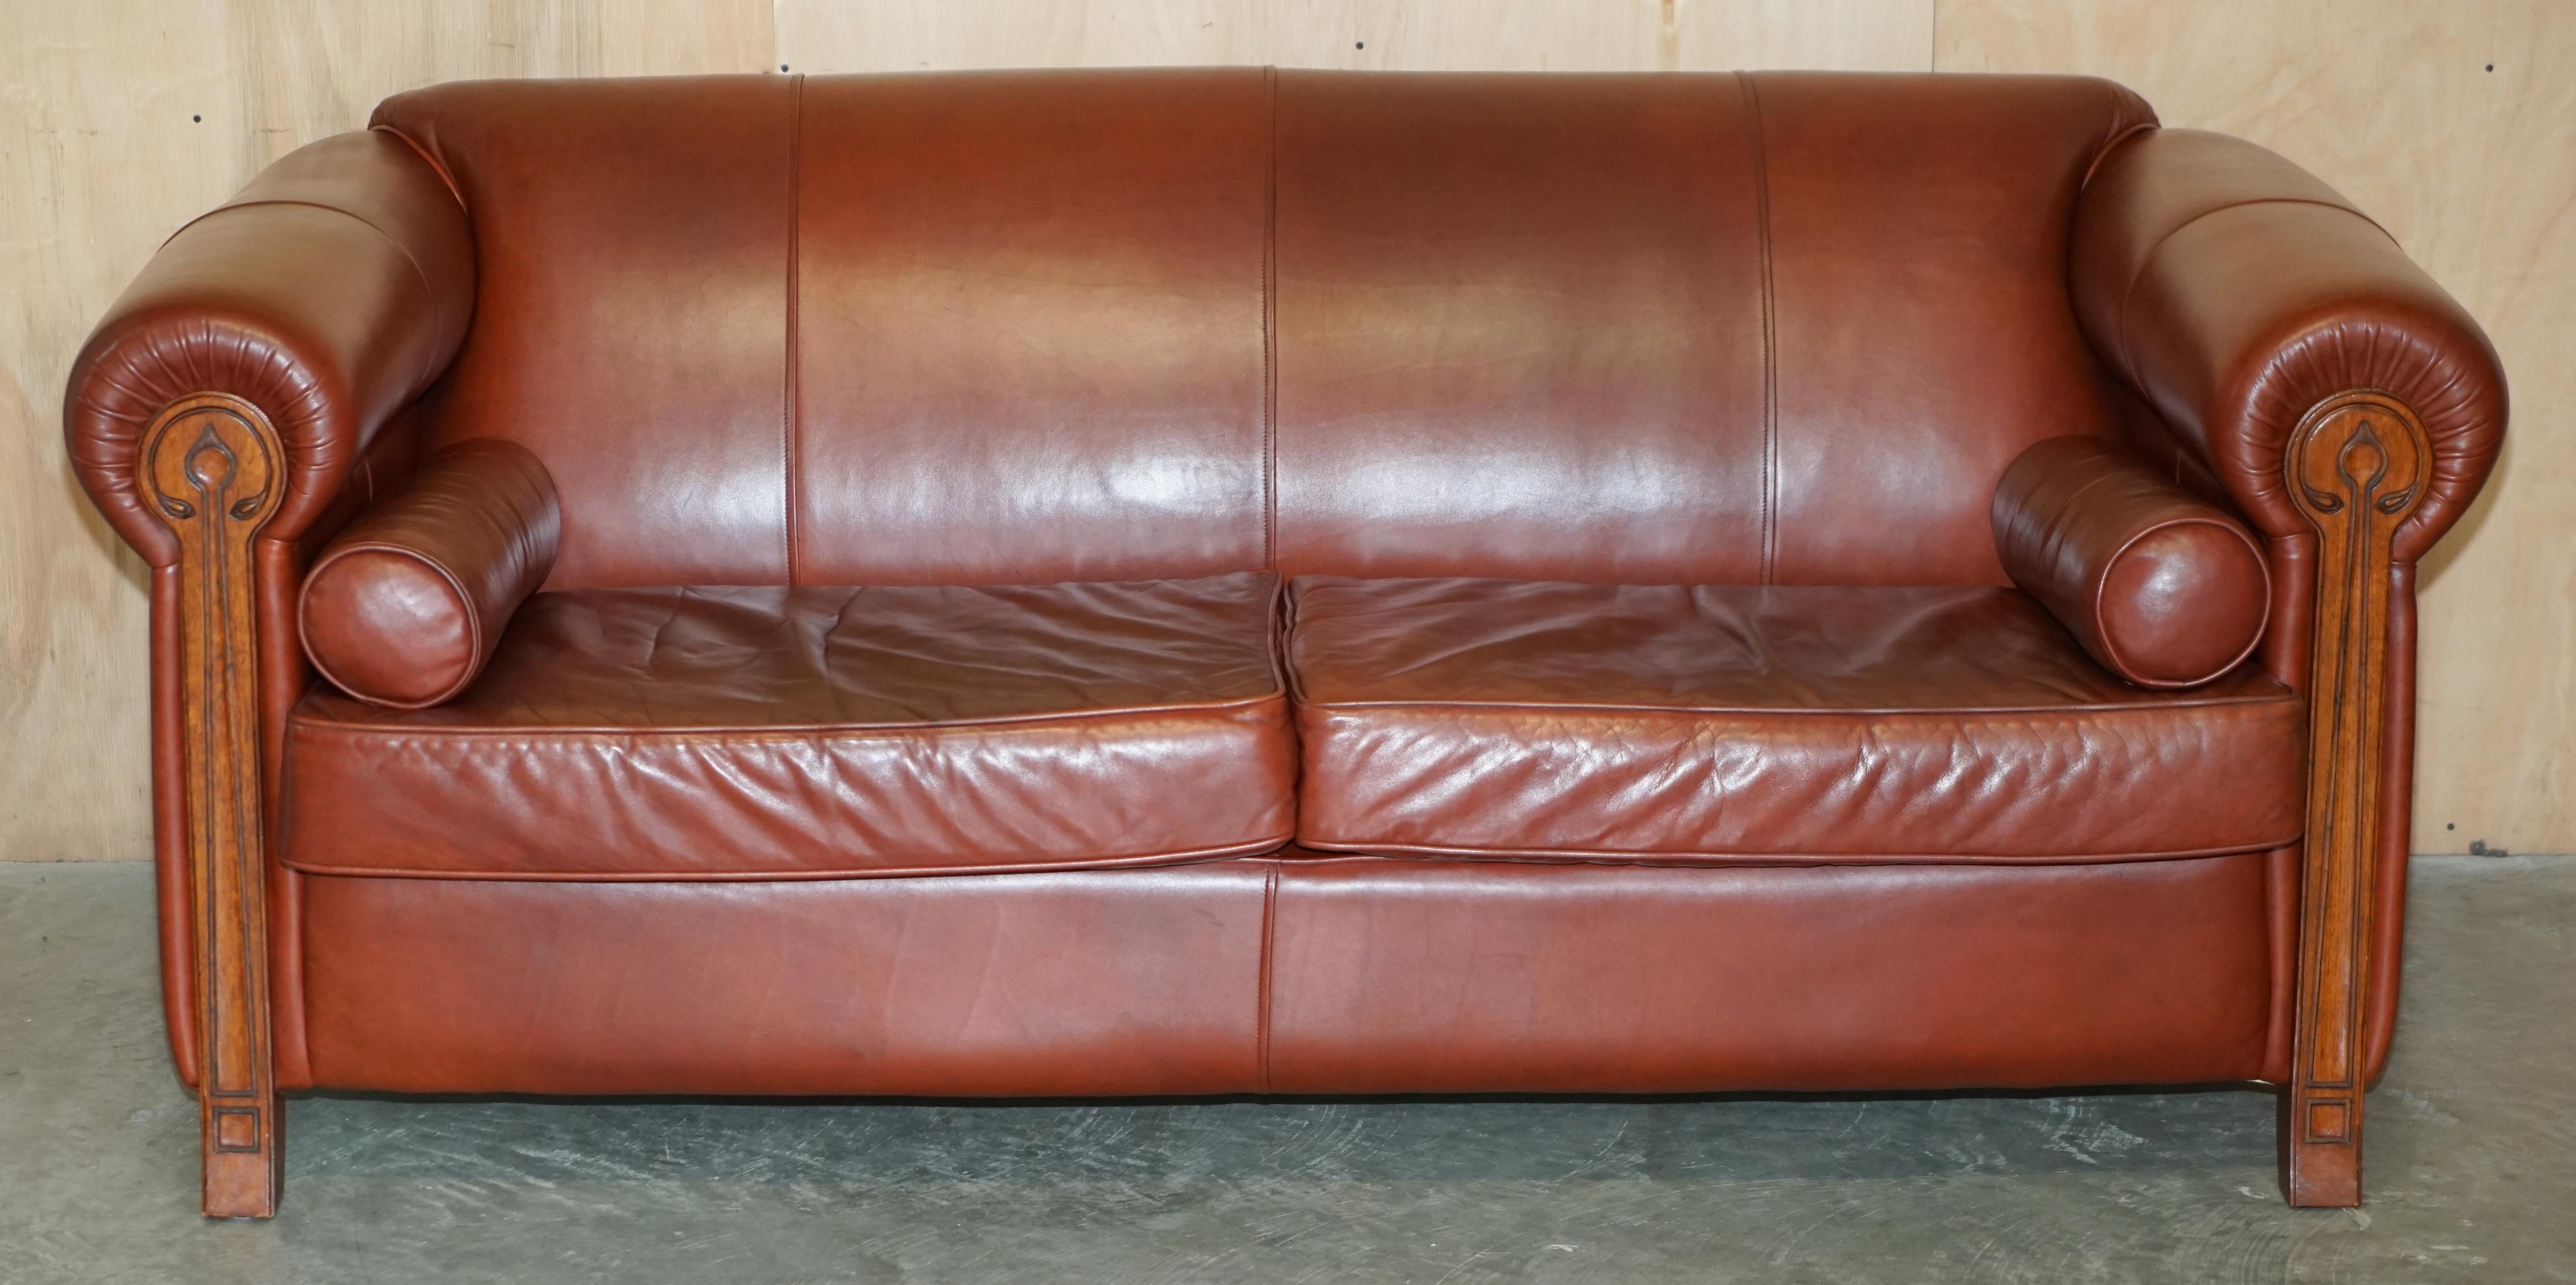 Royal House Antiques

Royal House Antiques is delighted to offer for sale this absolutely stunning vintage Chestnut brown leather sofa, made in the Liberty's Art Nouveau style with nicely carved arms 

Please note the delivery fee listed is just a